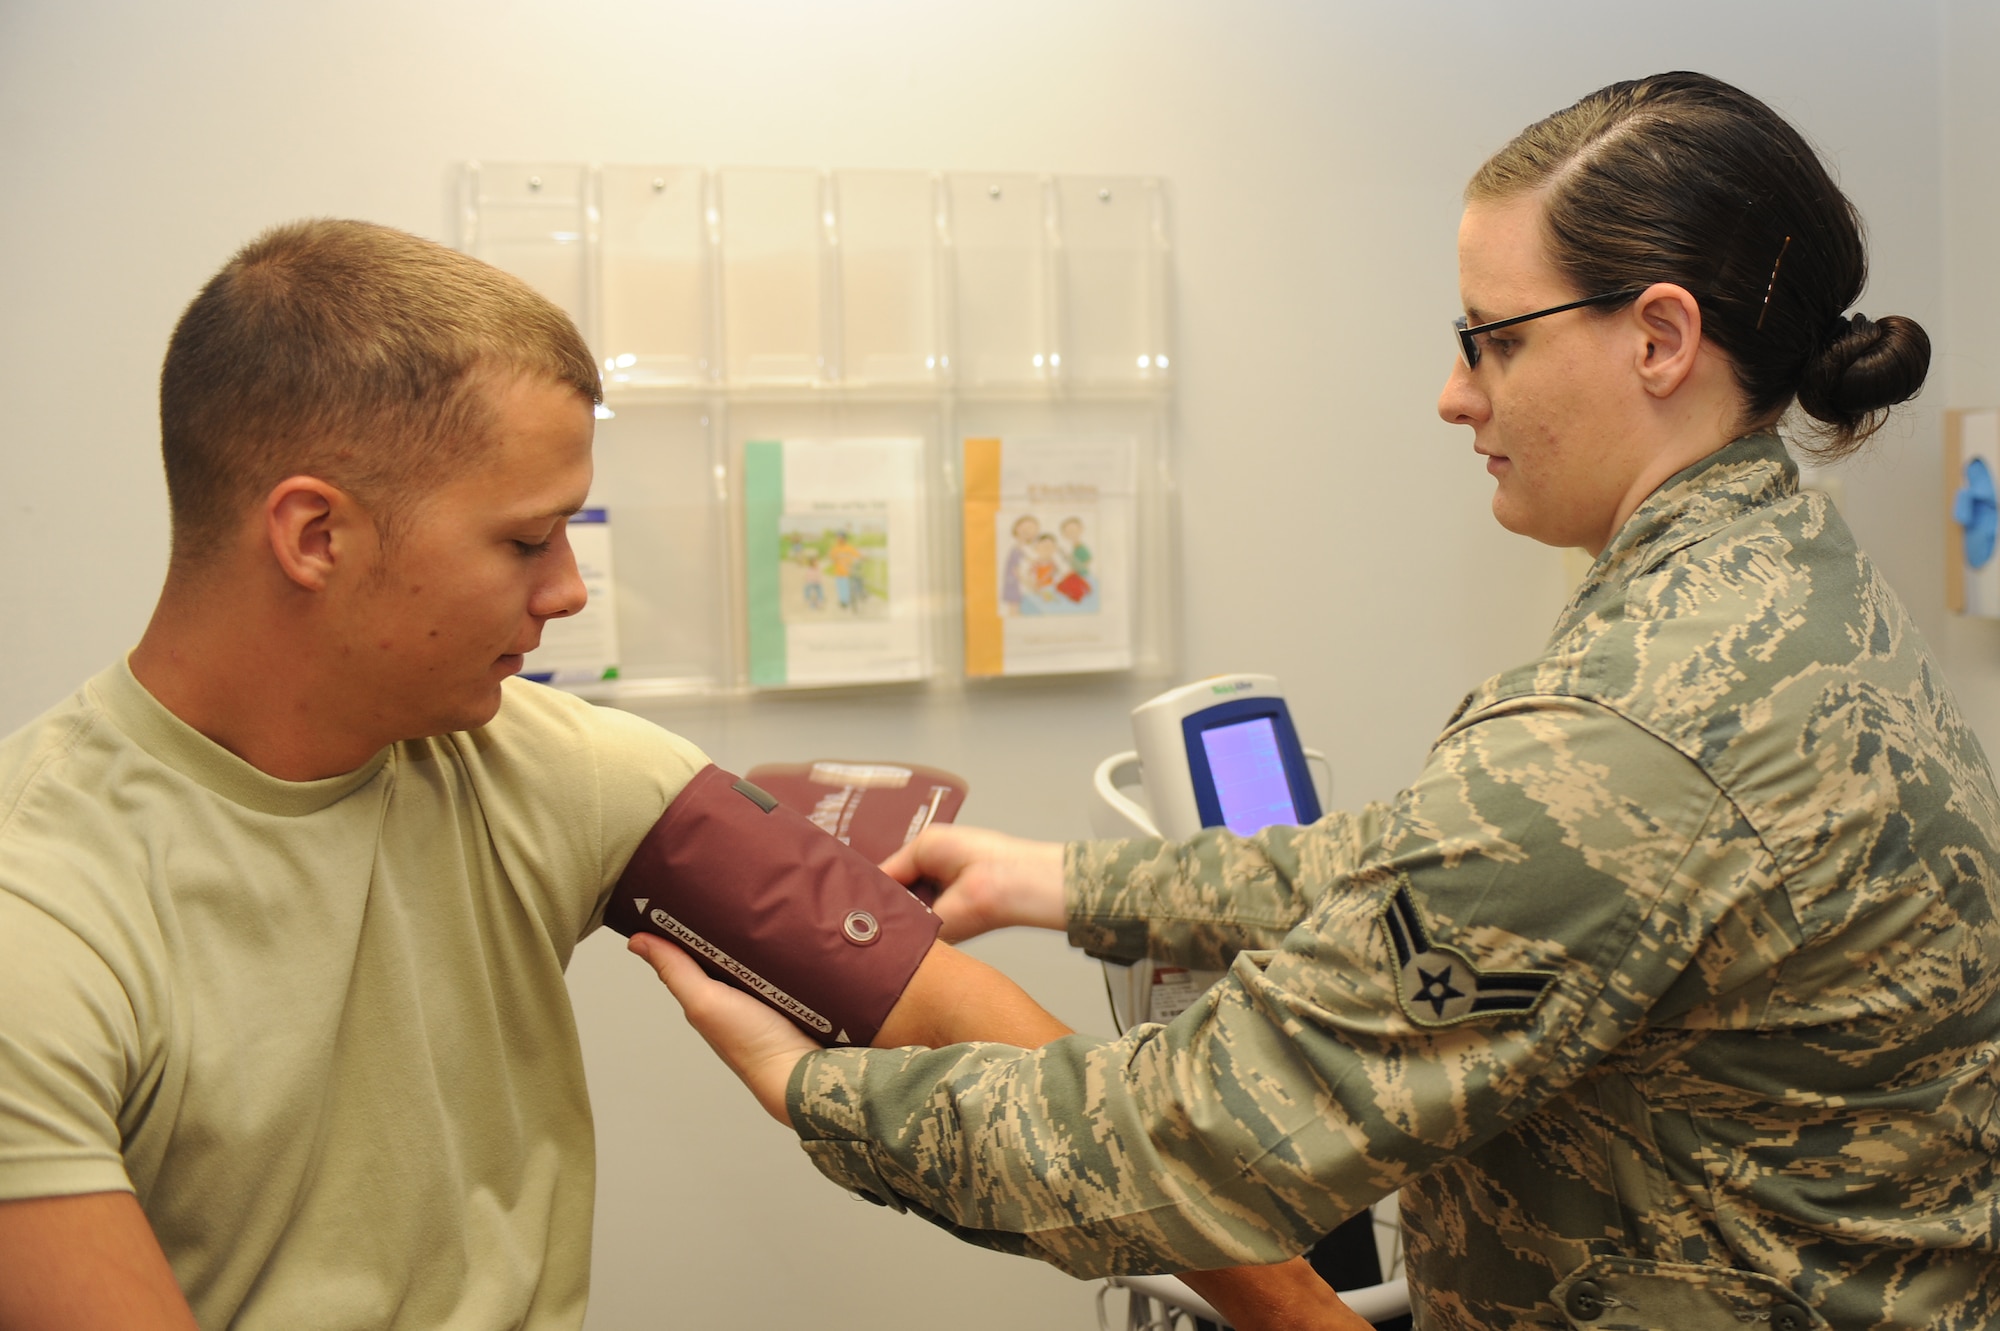 U.S. Air Force Airman 1st Class Kelsey Rayburn secures a blood pressure cuff to Senior Airman Christopher Cavin’s arm during sick call at the 4th Medical Group on Seymour Johnson Air Force Base, N.C., May 9, 2012. Prior to being seen by the physician it is mandatory for each patient to have their vital signs taken. Rayburn, 4th Medical Operations Squadron medical technician, is from Hagerstown, Ind. Cavins, 4th Contracting Squadron contract specialist, hails from South Rockwood, Mich. (U.S. Air Force photo/Airman 1st Class John Nieves Camacho/Released)